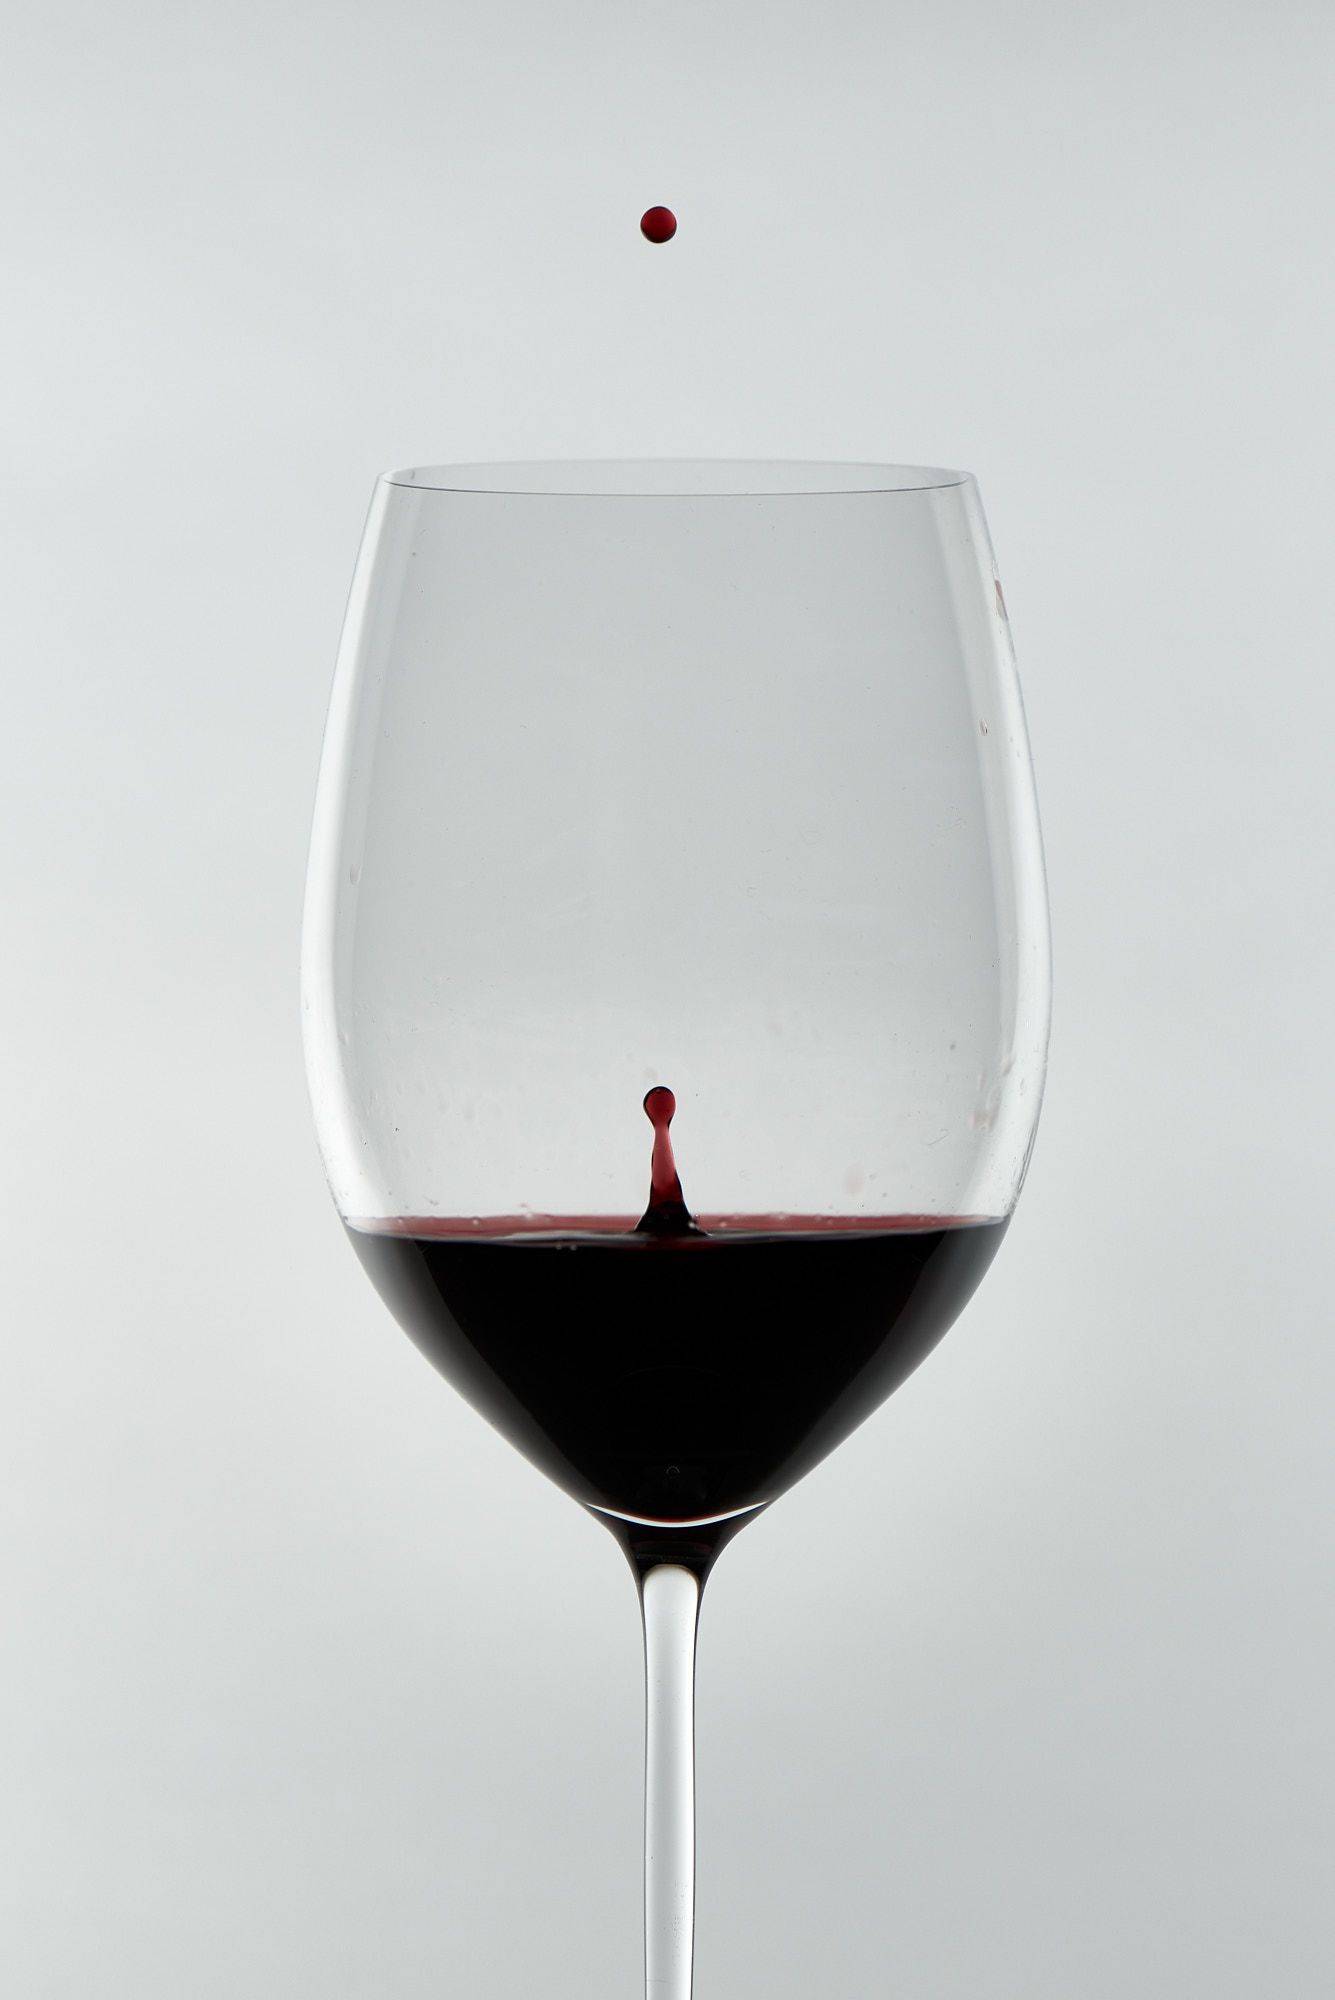 riedel veritas cabernet and merlot wine glass on white background